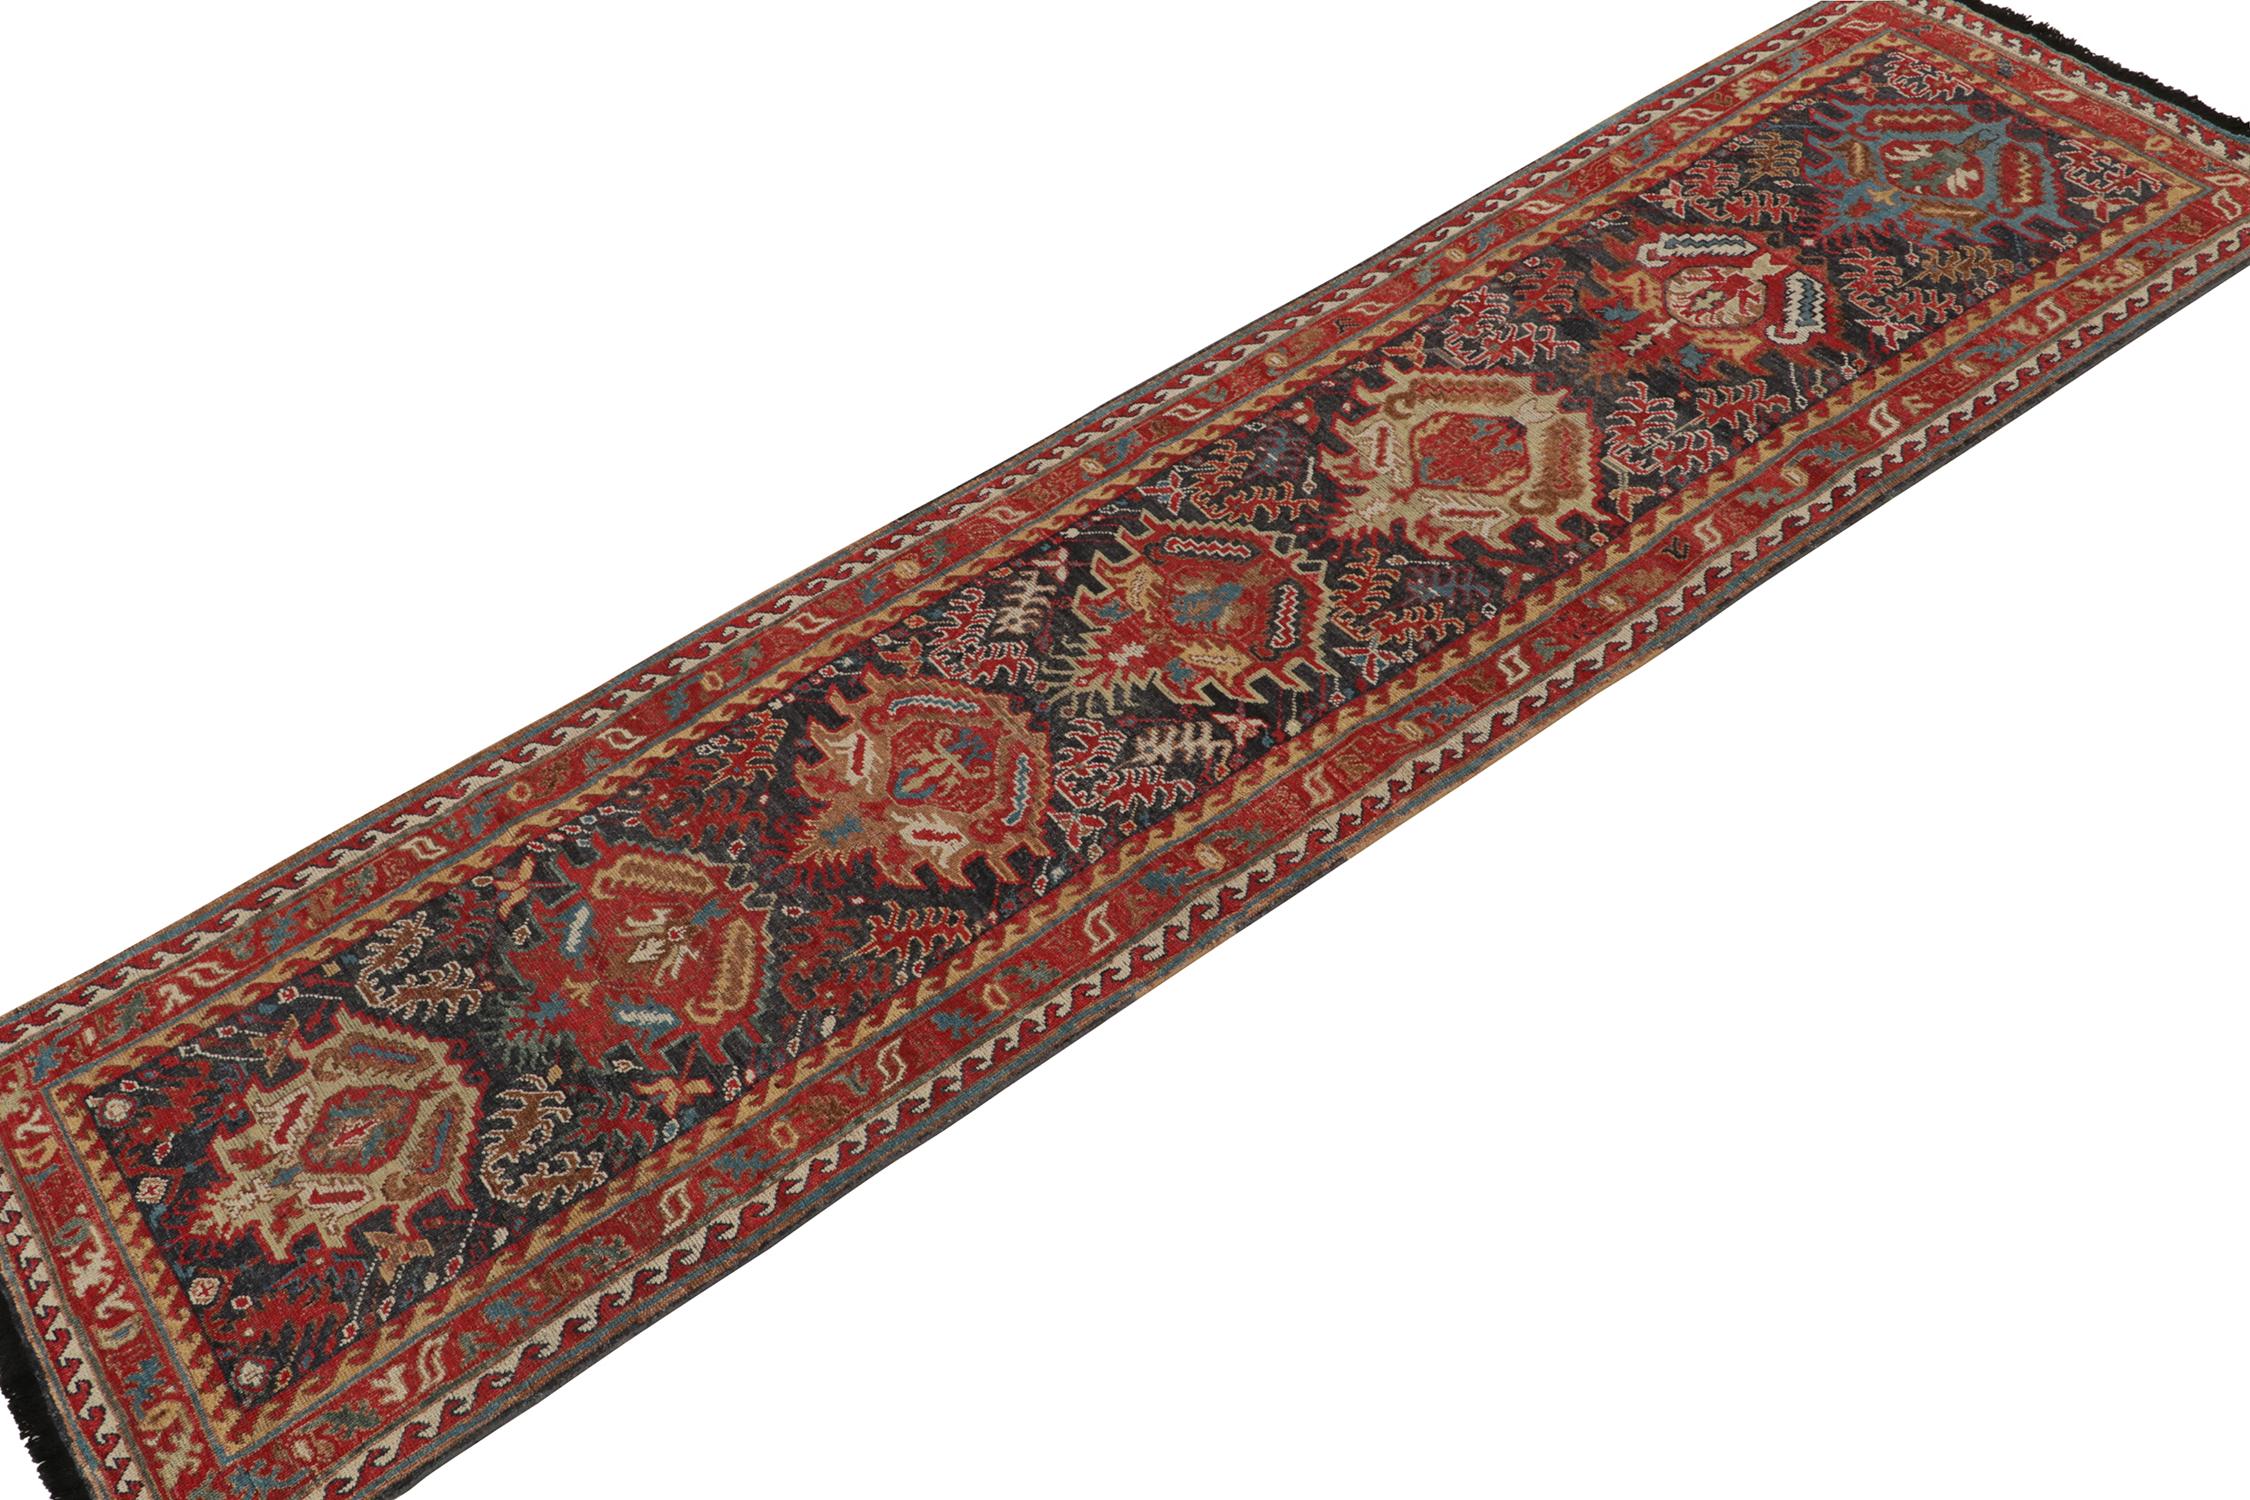 From our extensive Burano Collection, a 3x12 tribal style runner in a delicious contemporary quality. 

Nomadic geometric-floral patterns flourish in a vivid play of red, blue, and beige-brown of a classic, rich presence. Keen eyes may note subtle